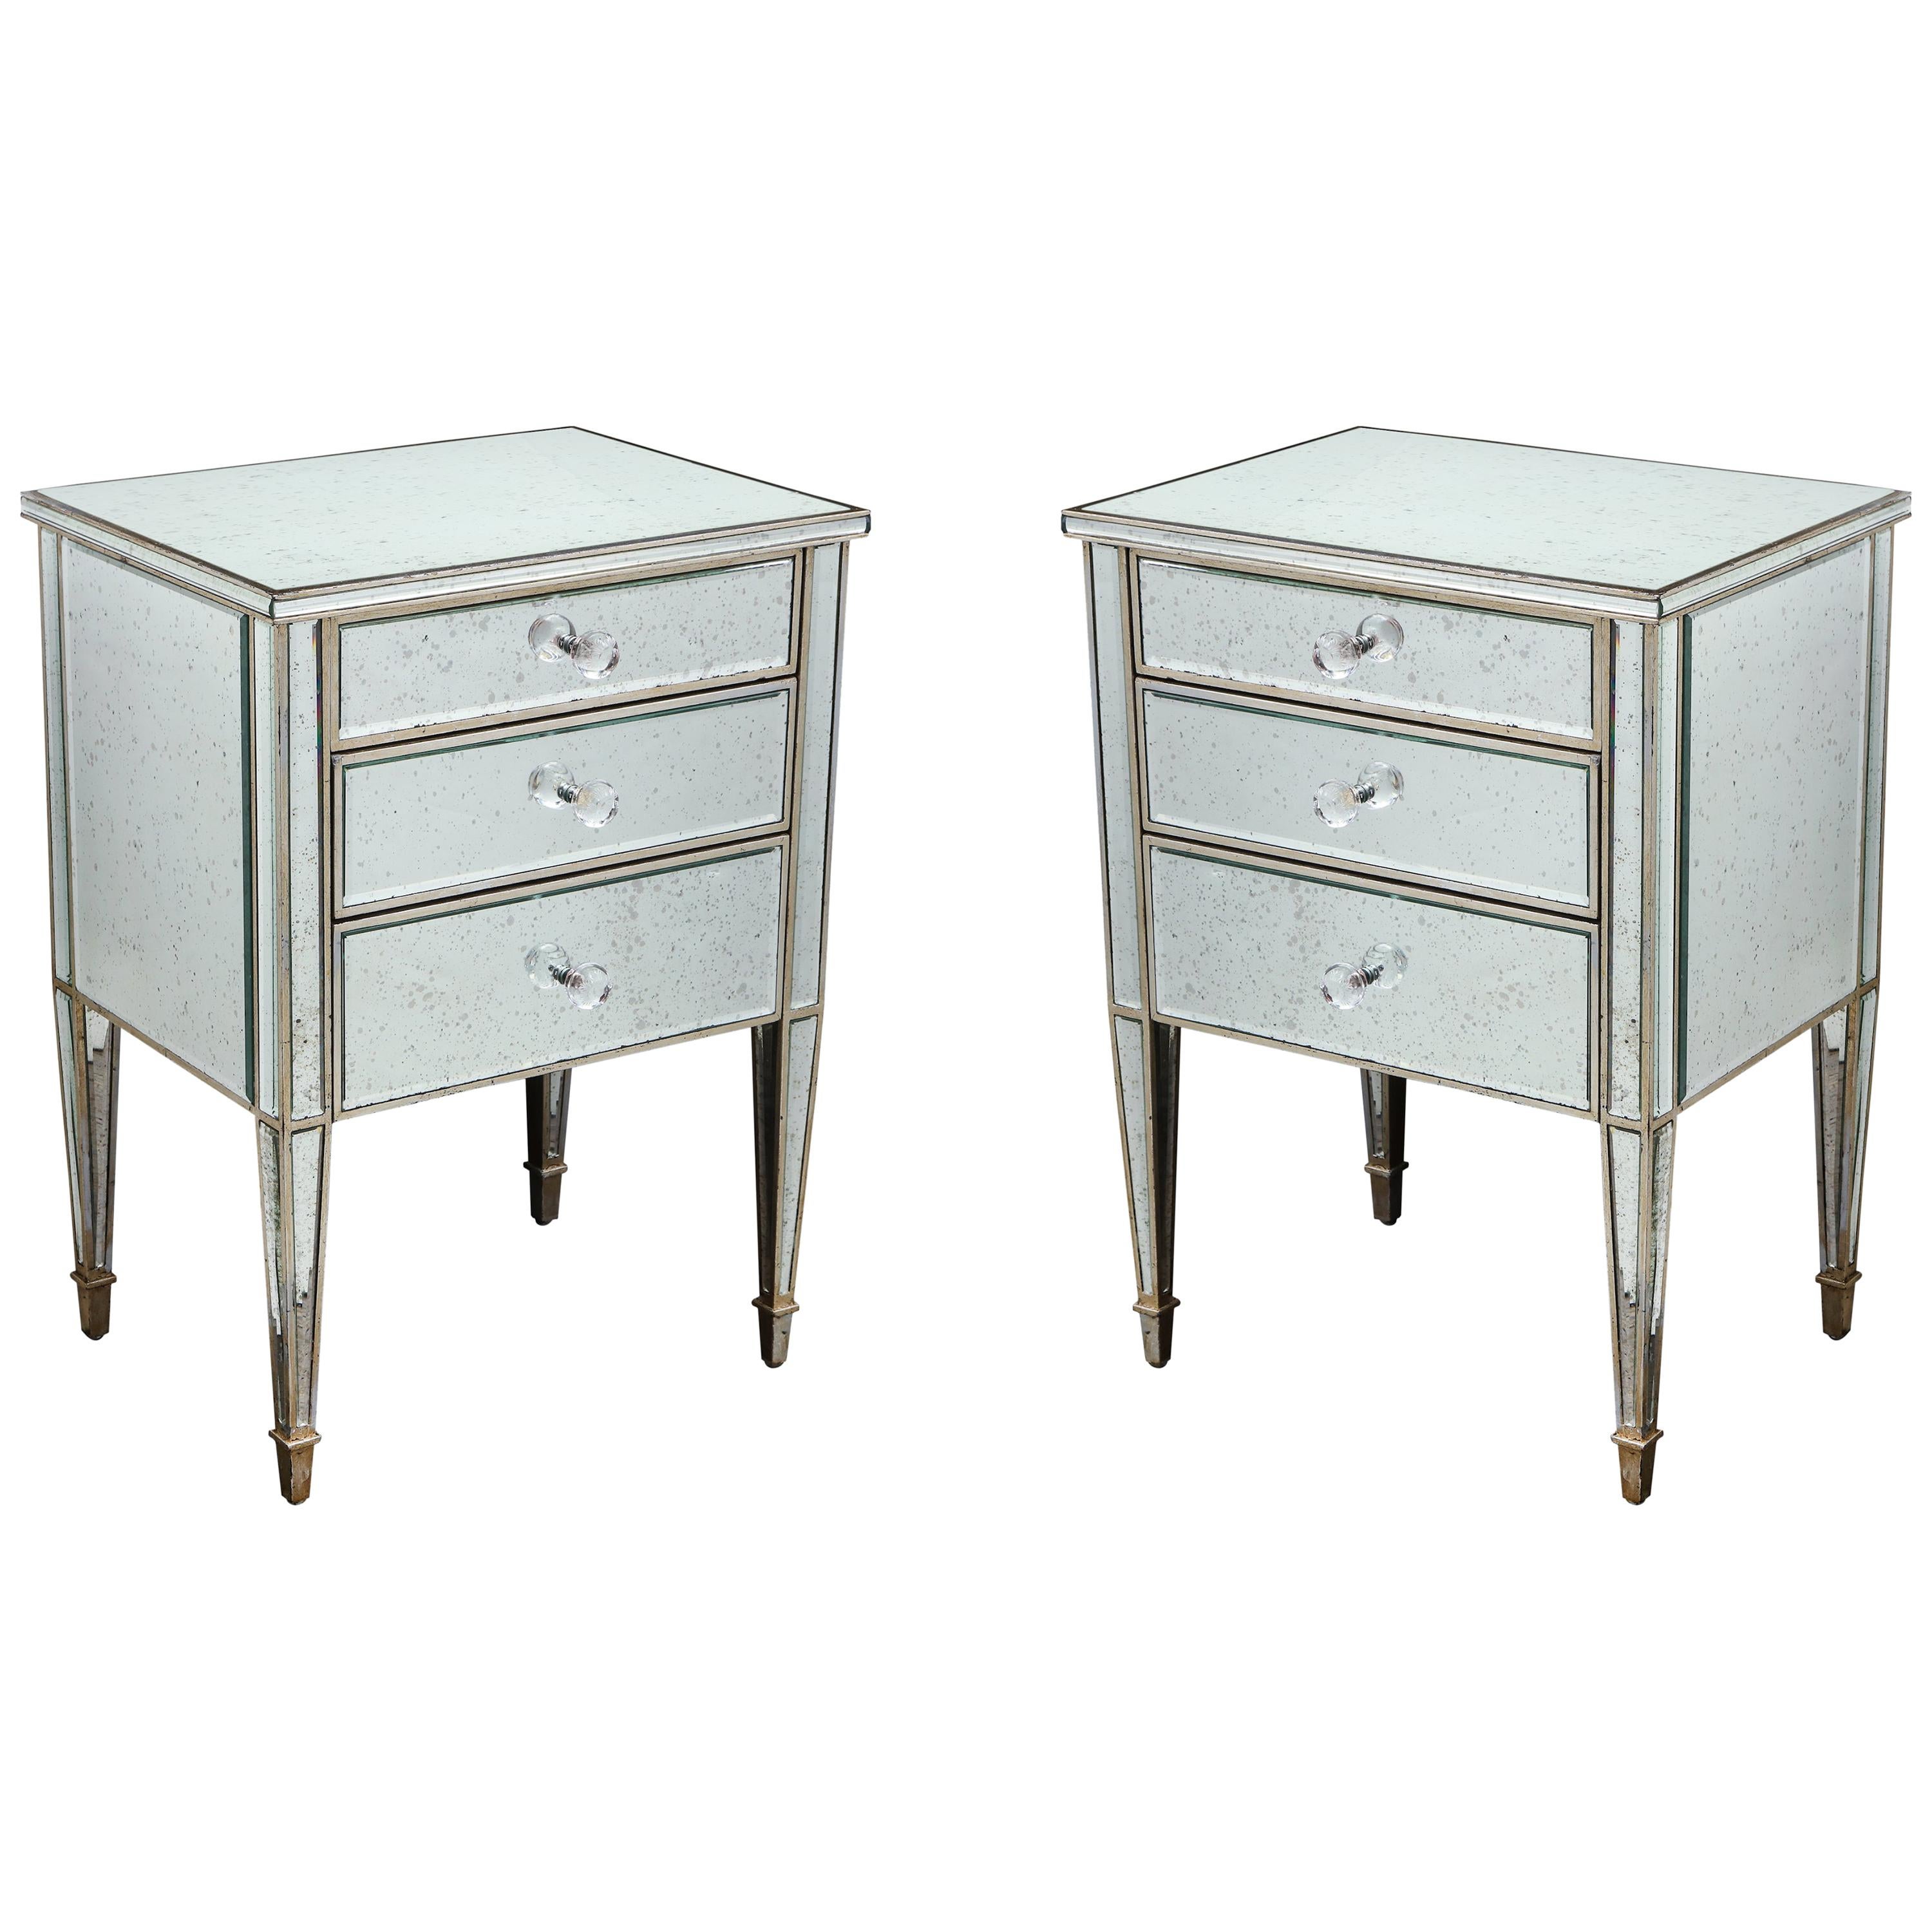 Pair of Antique Mirrored Nightstands with Silver Gilt Trim For Sale